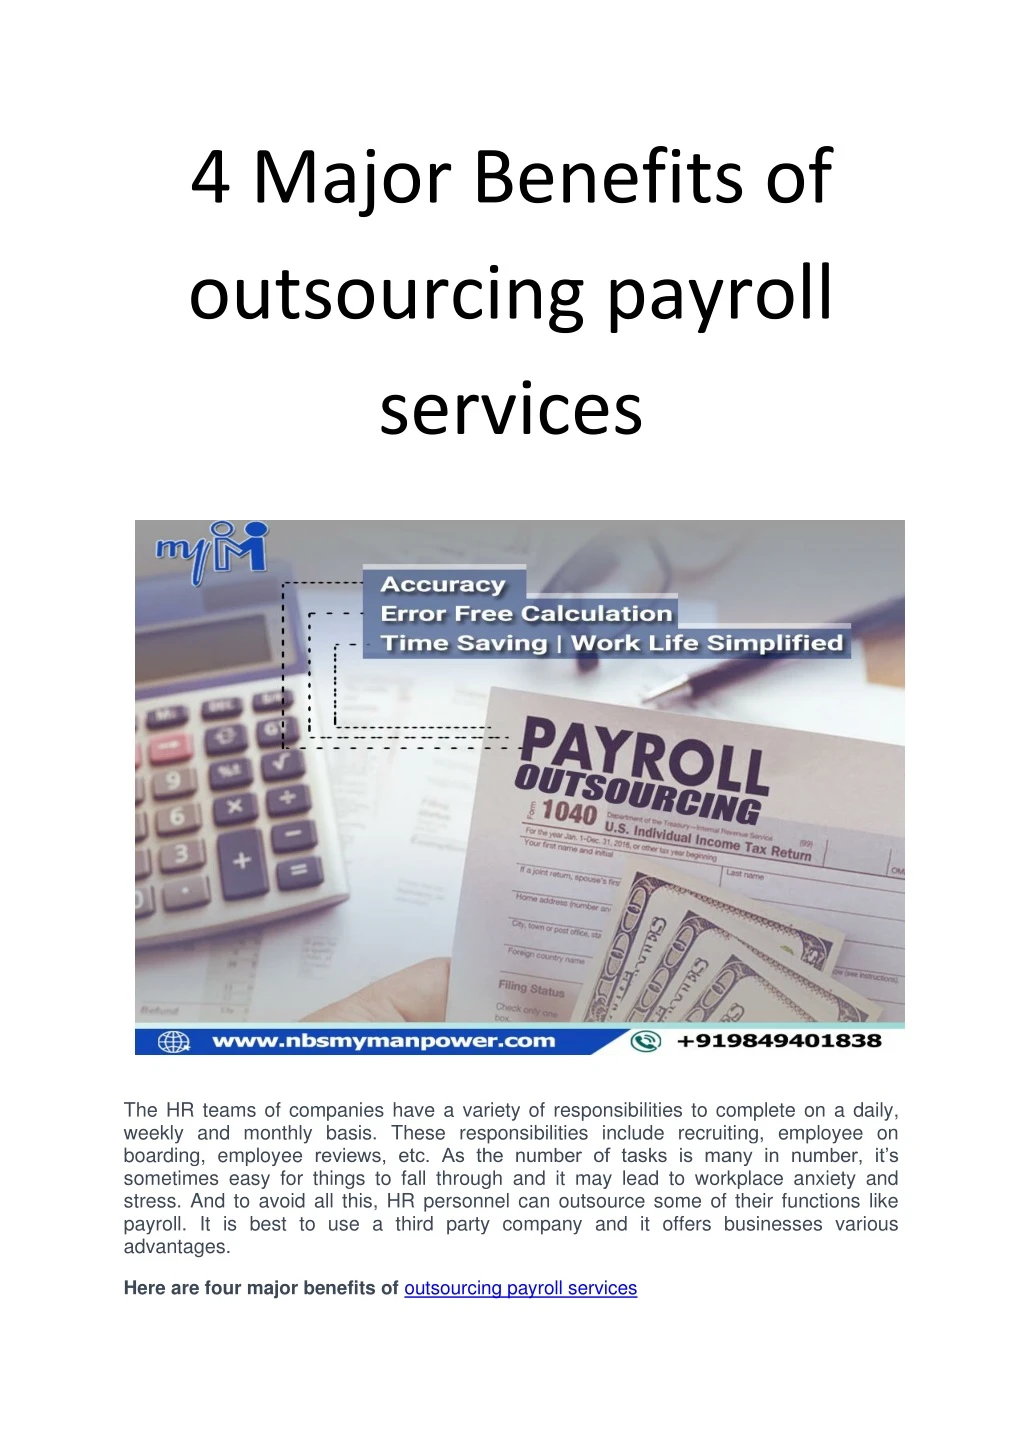 4 major benefits of outsourcing payroll services